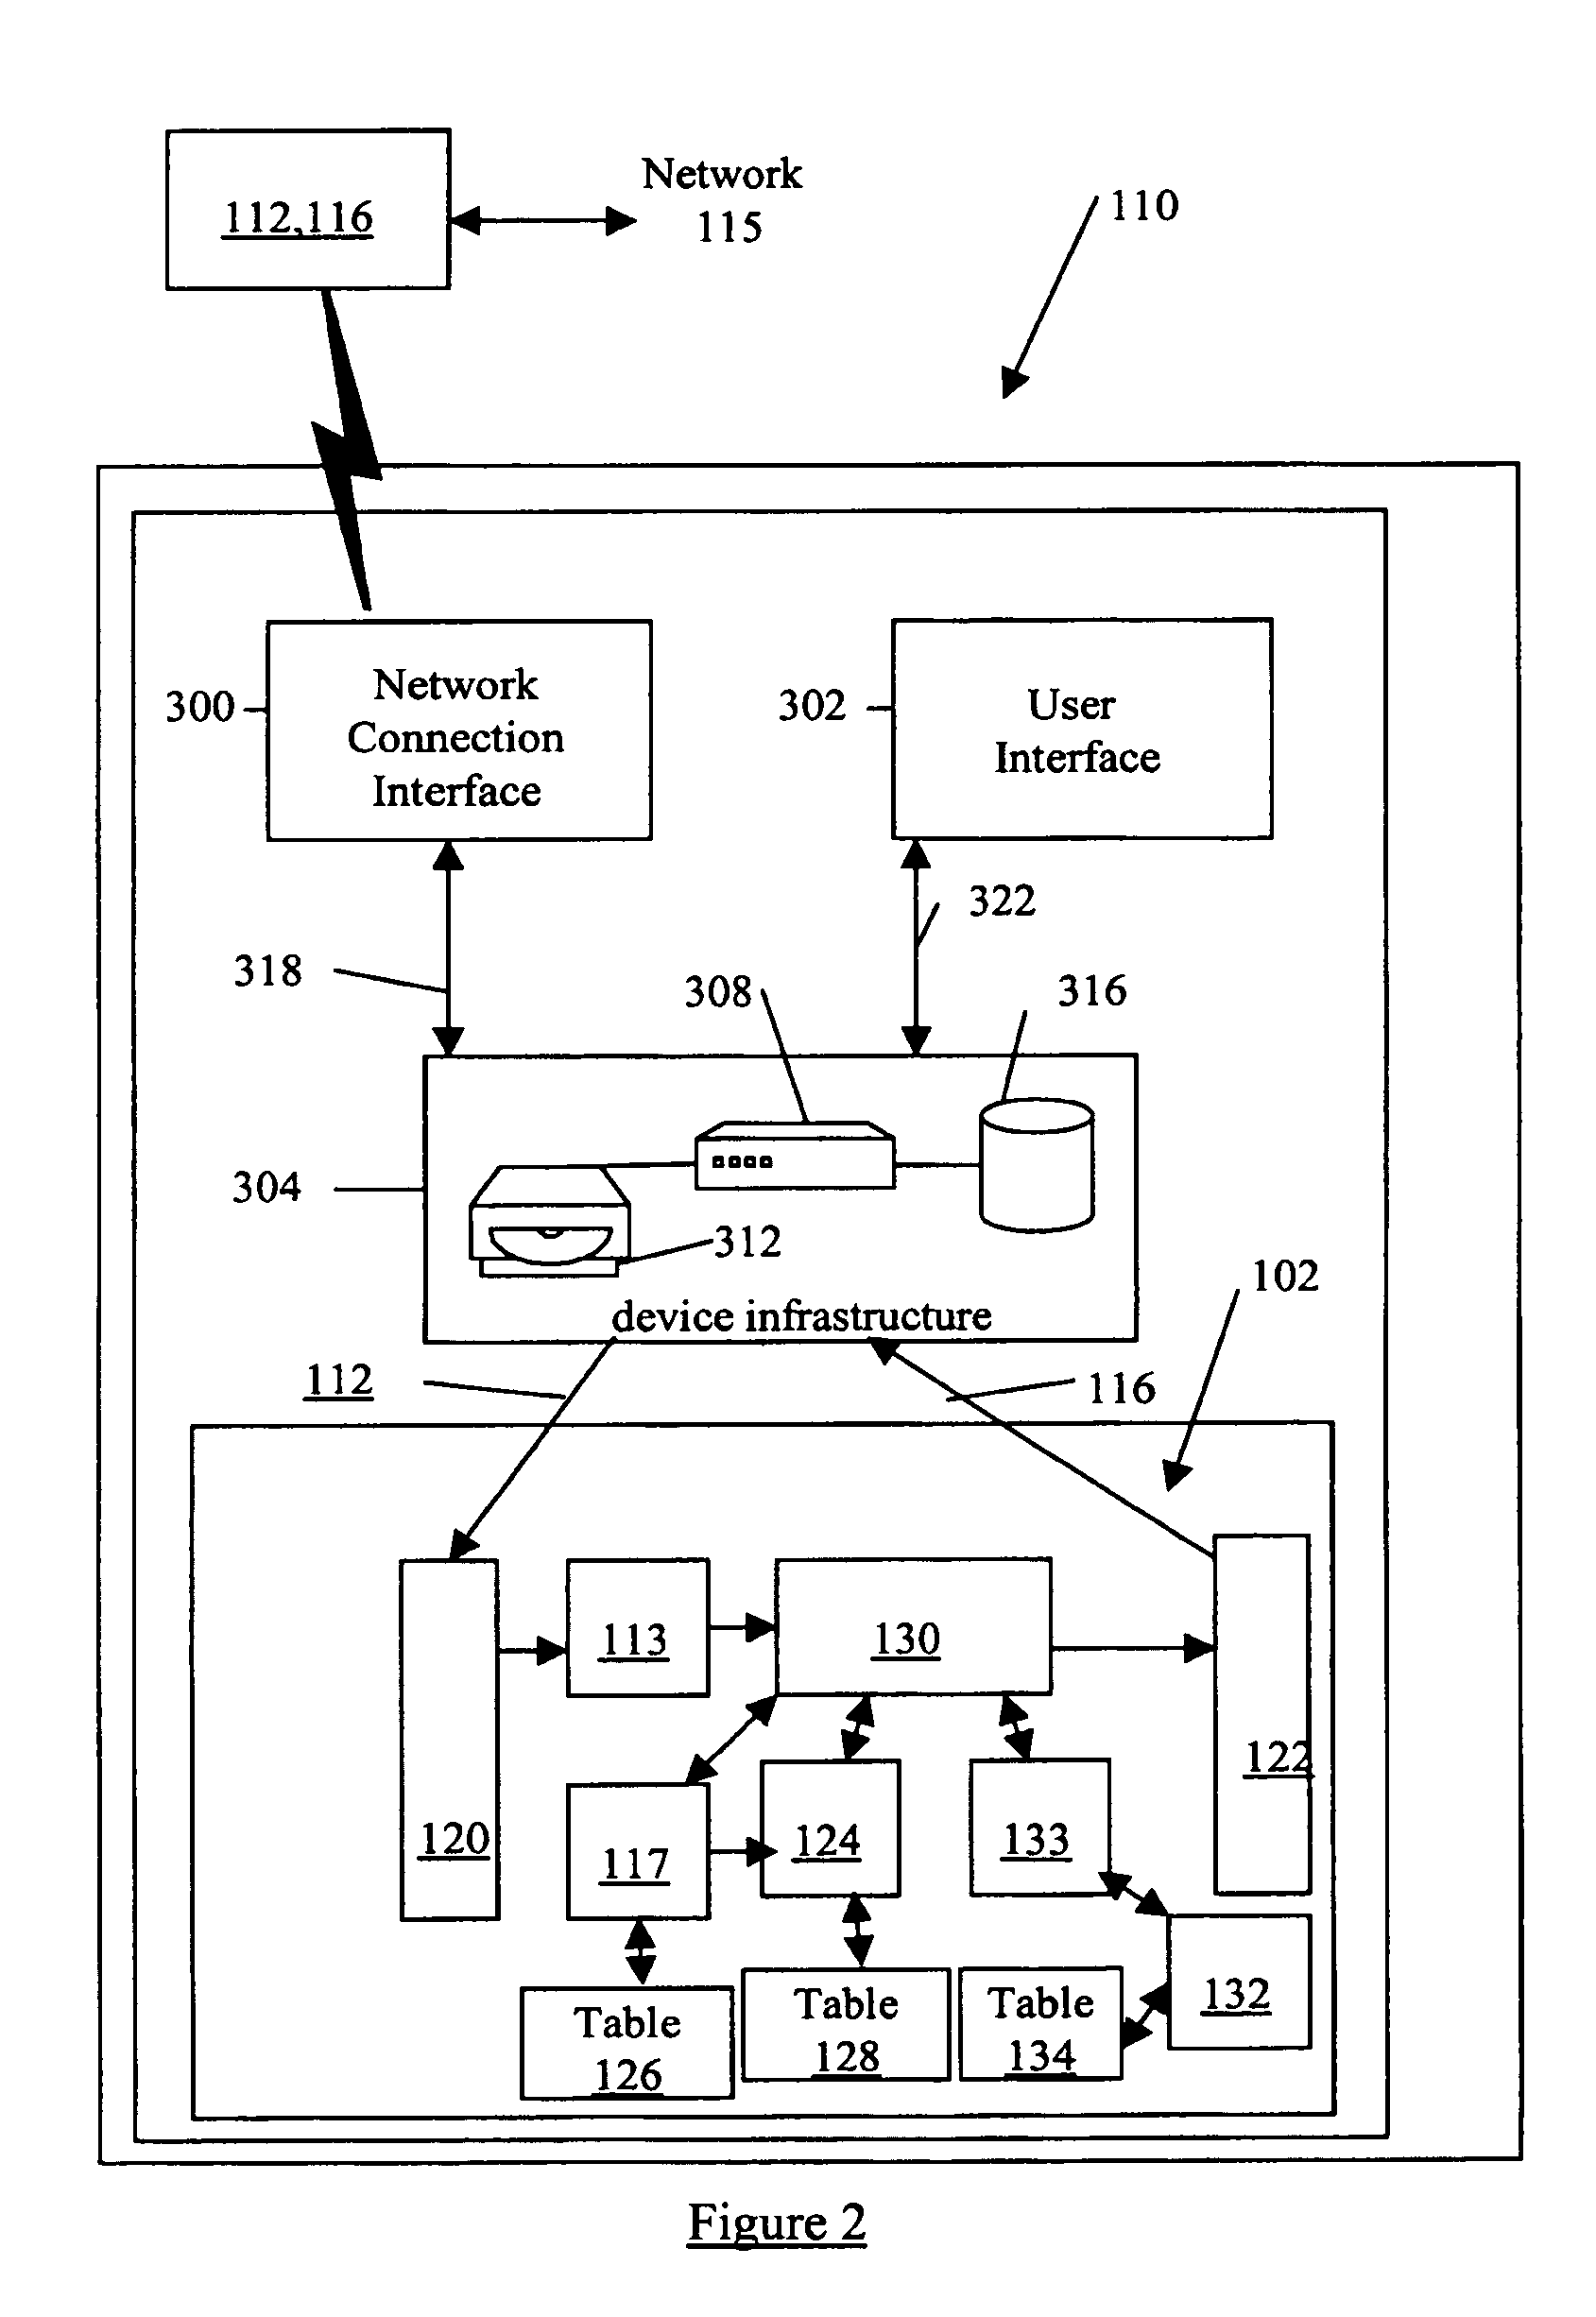 Method and apparatus for parallel sequencing of messages between disparate information systems